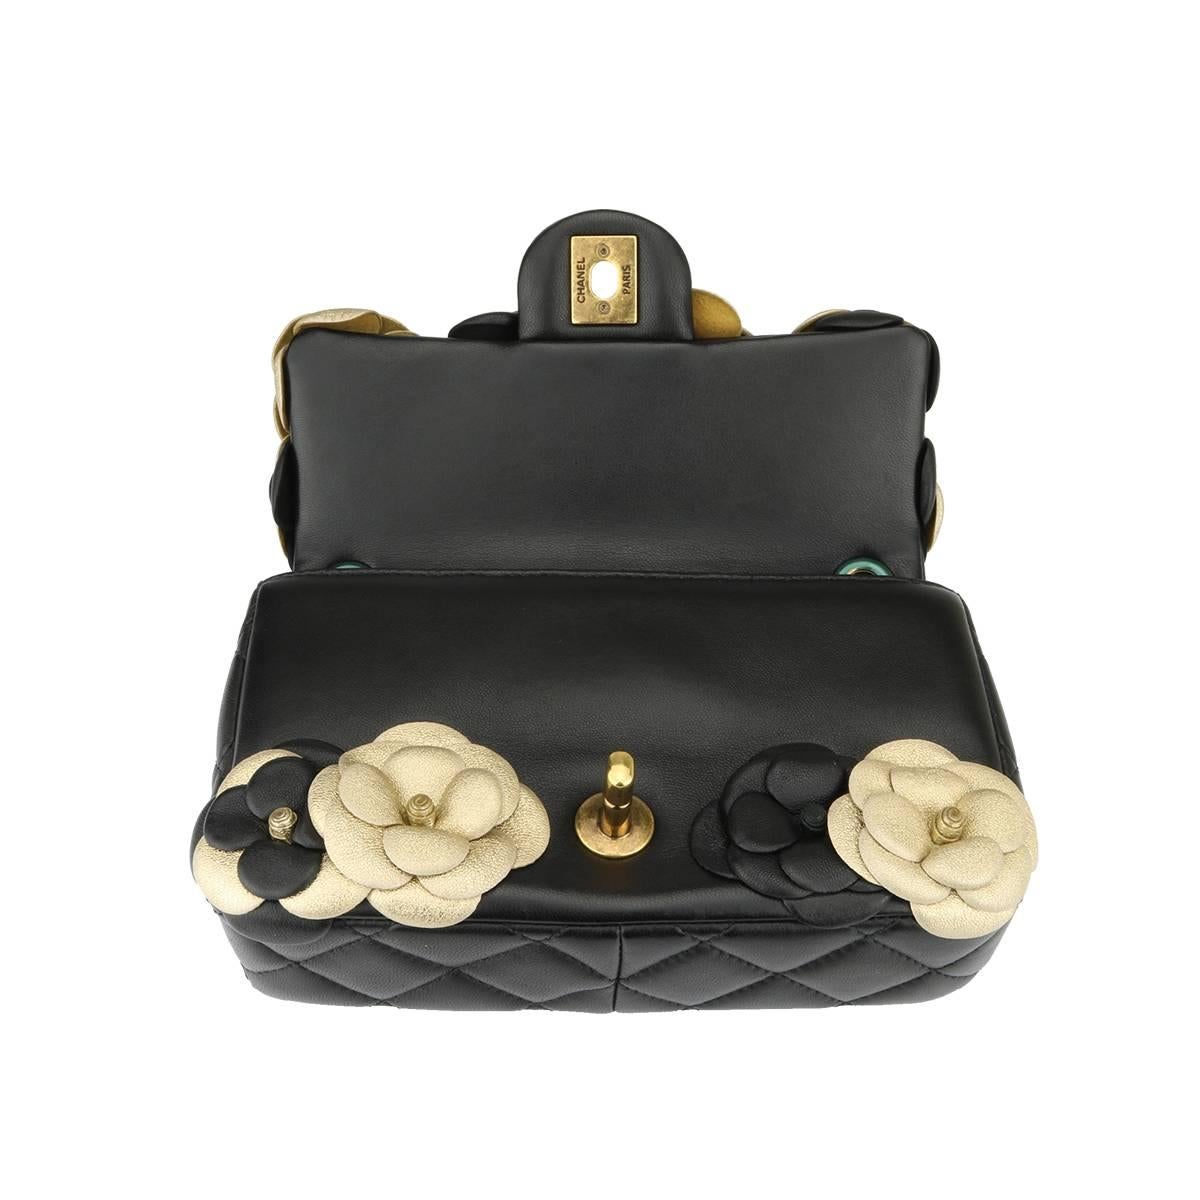 Chanel Camellia Mini Black / Gold Lambskin bag with Antique Gold Hardware, 2015 6